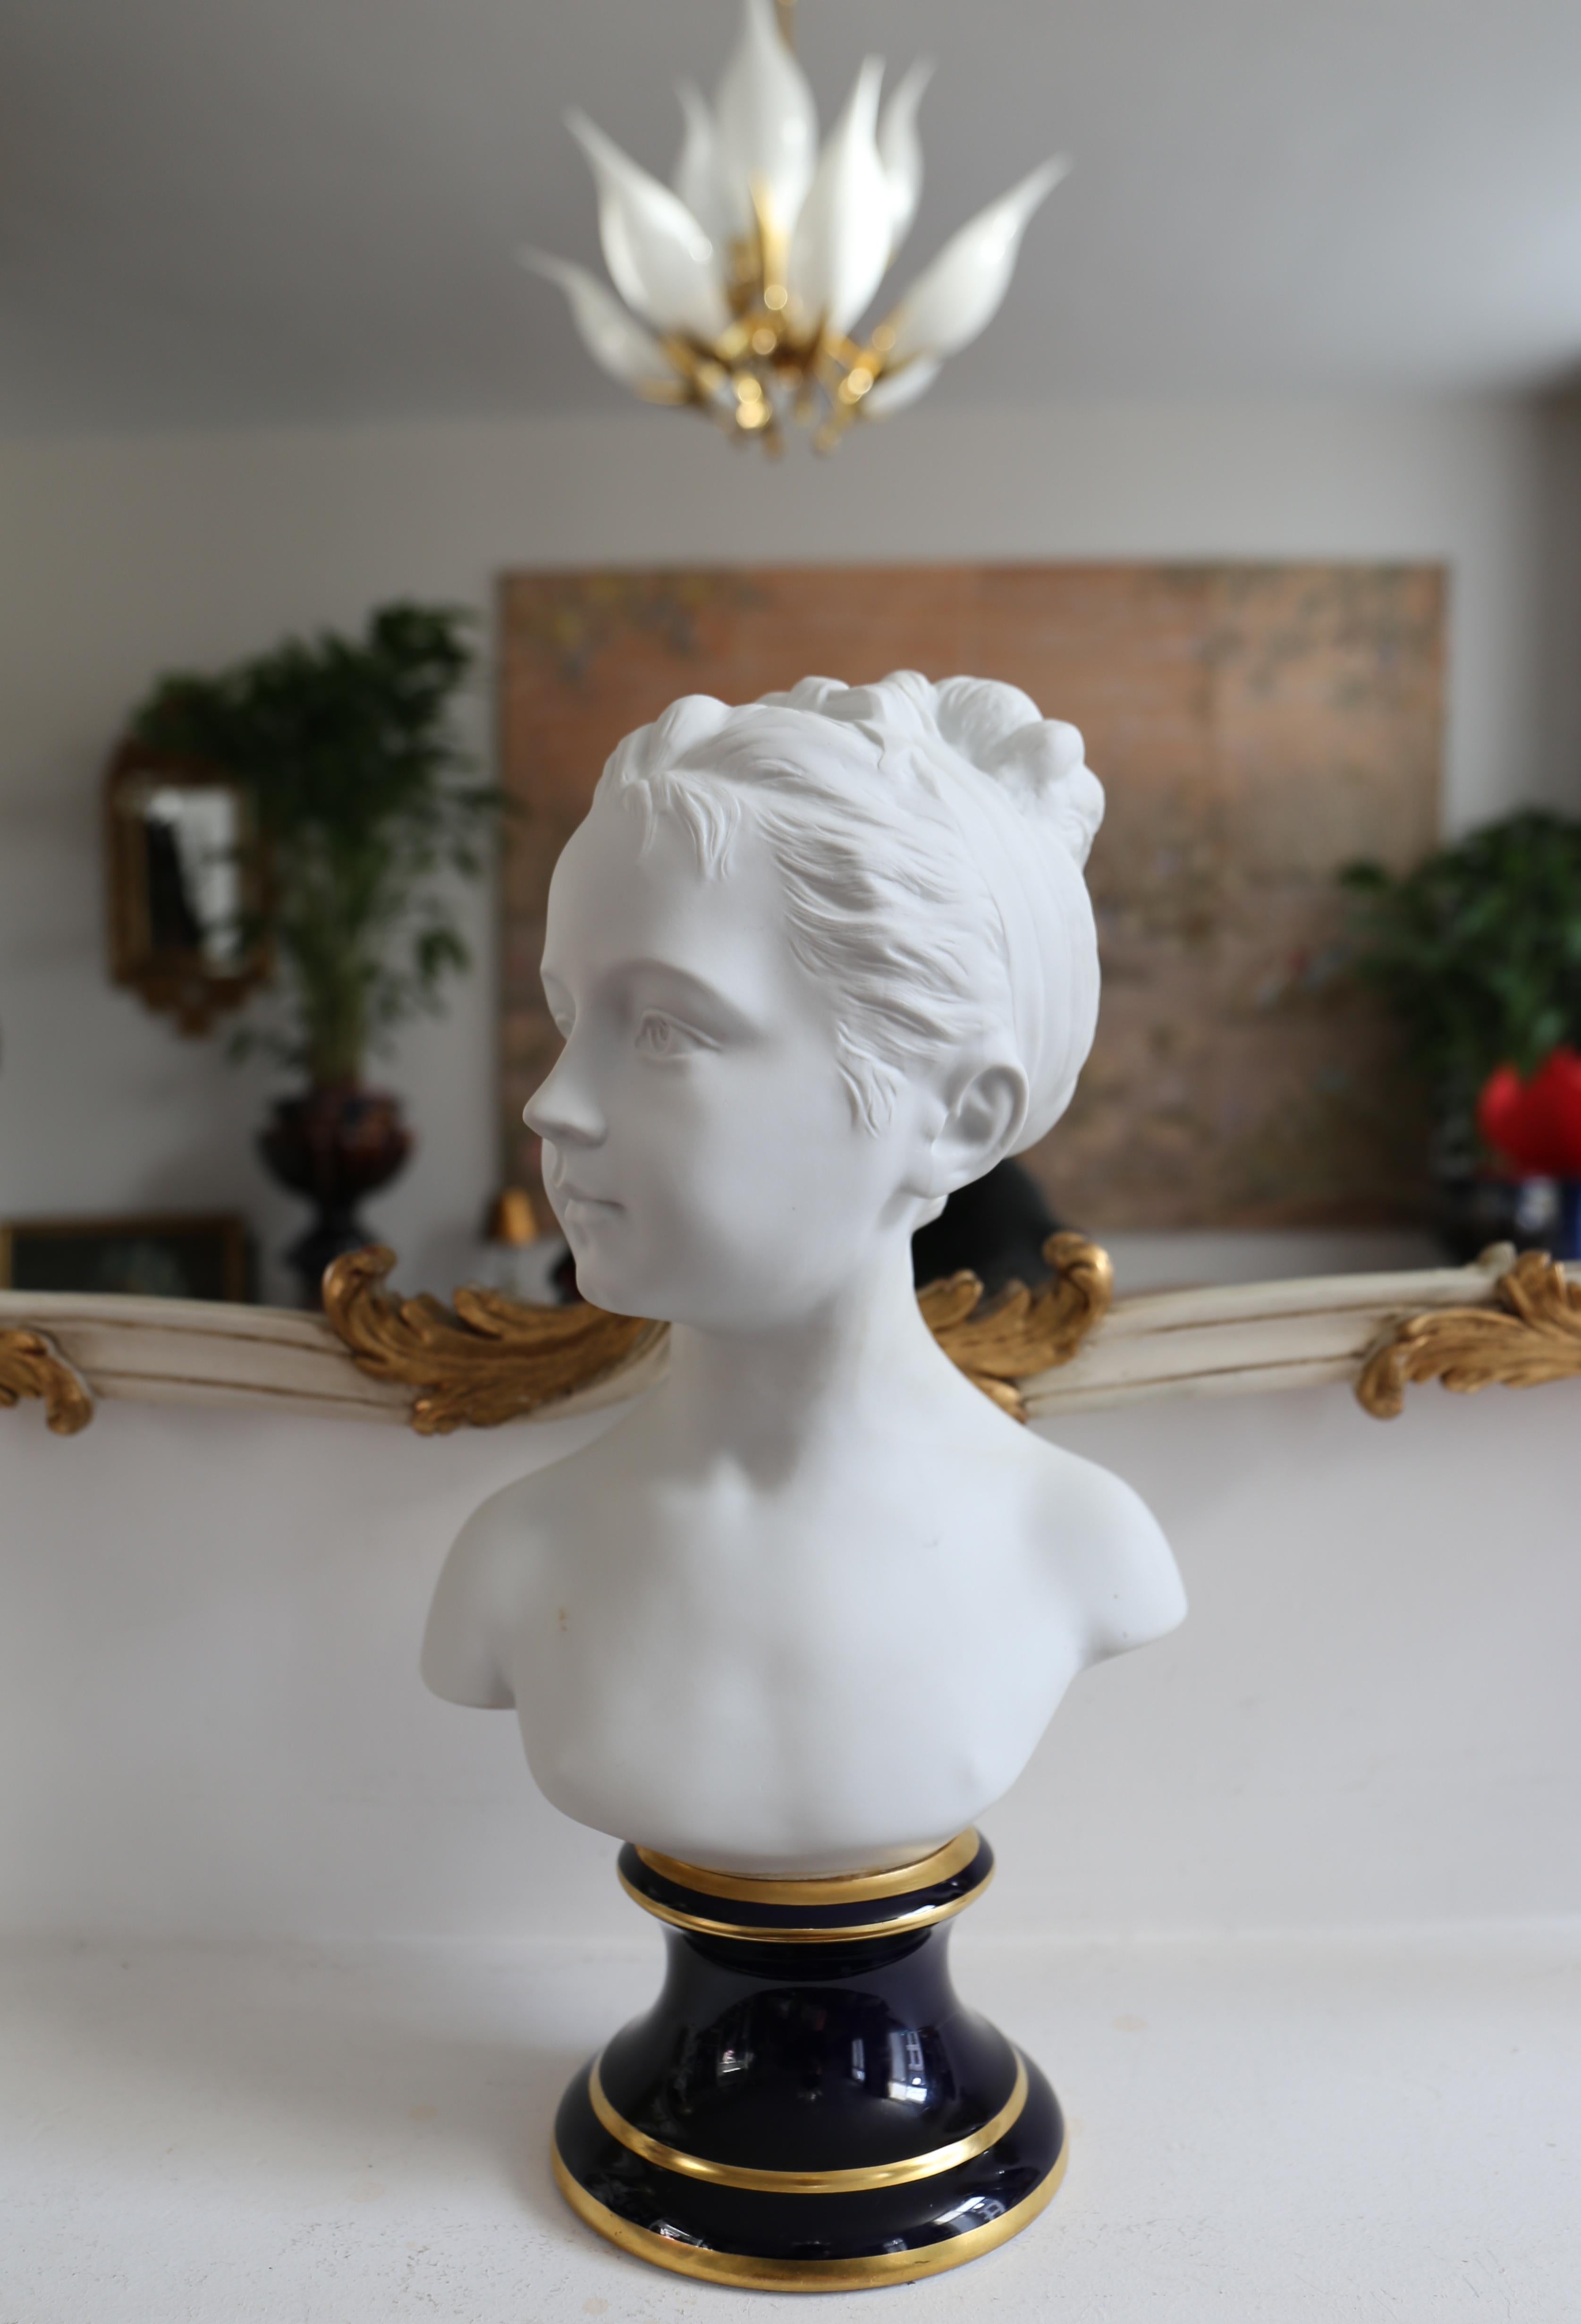 Gorgeous porcelain busts of Louise Brongniart in bisque porcelain on royal blue enameled base, by Tharaud, Limoges, after the originals by Jean-Antoine Houdon (1741-1828). Louise was the child of the architect Alexandre Théodore Brongniart